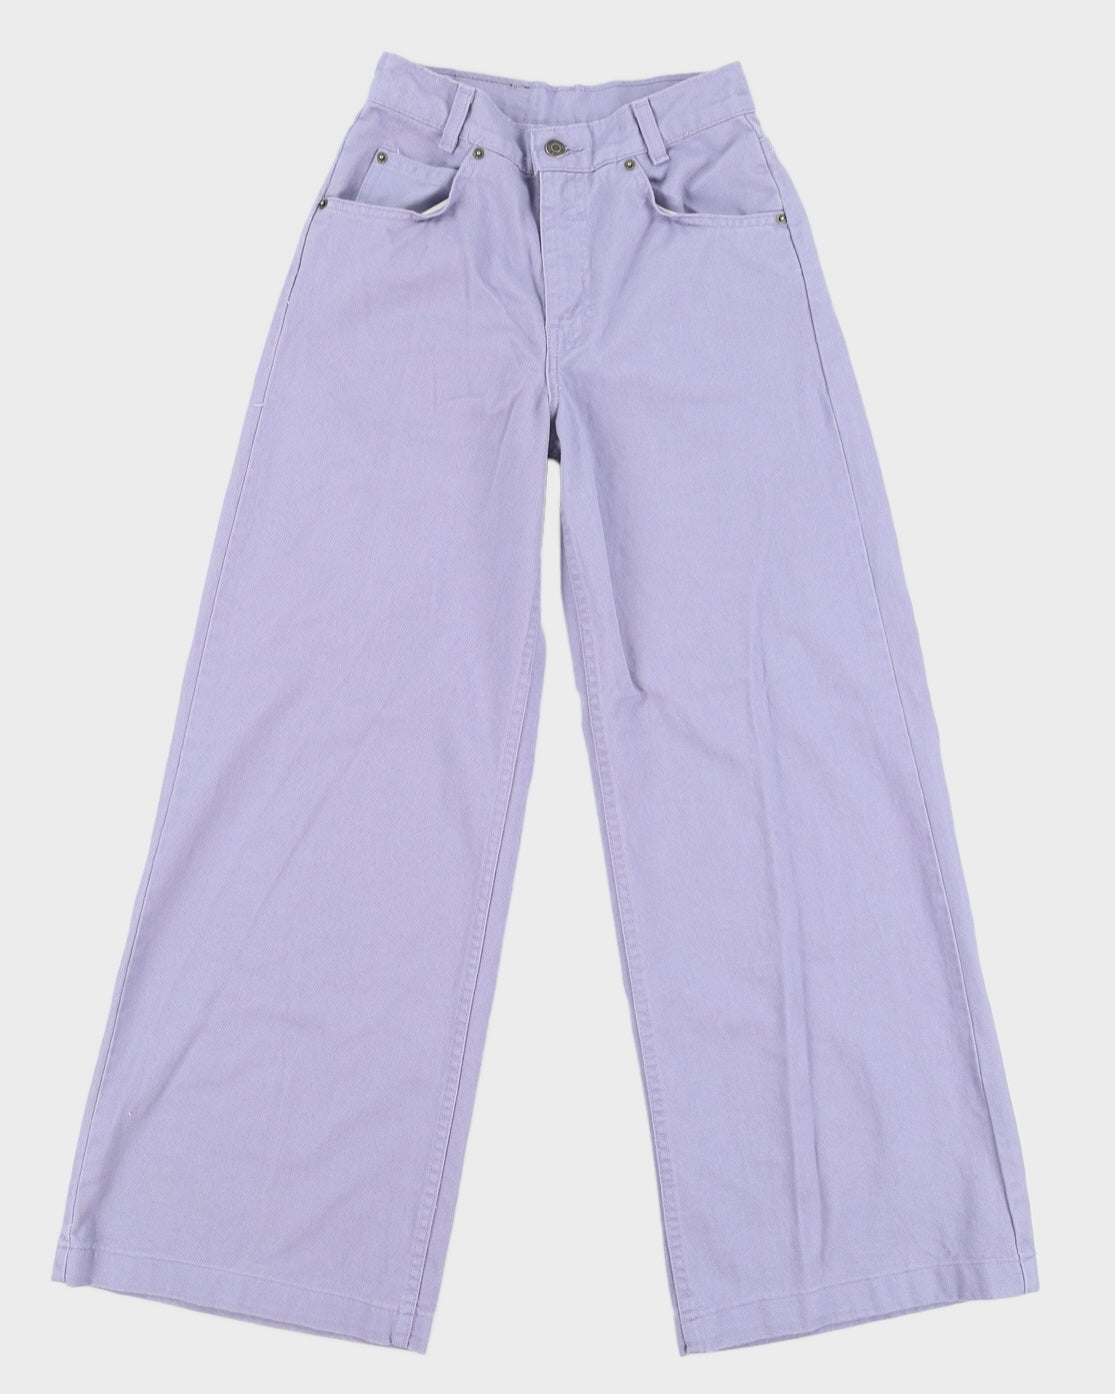 00s Levi's White Tab Purple High Waisted Wide Leg Jeans - W26 L30